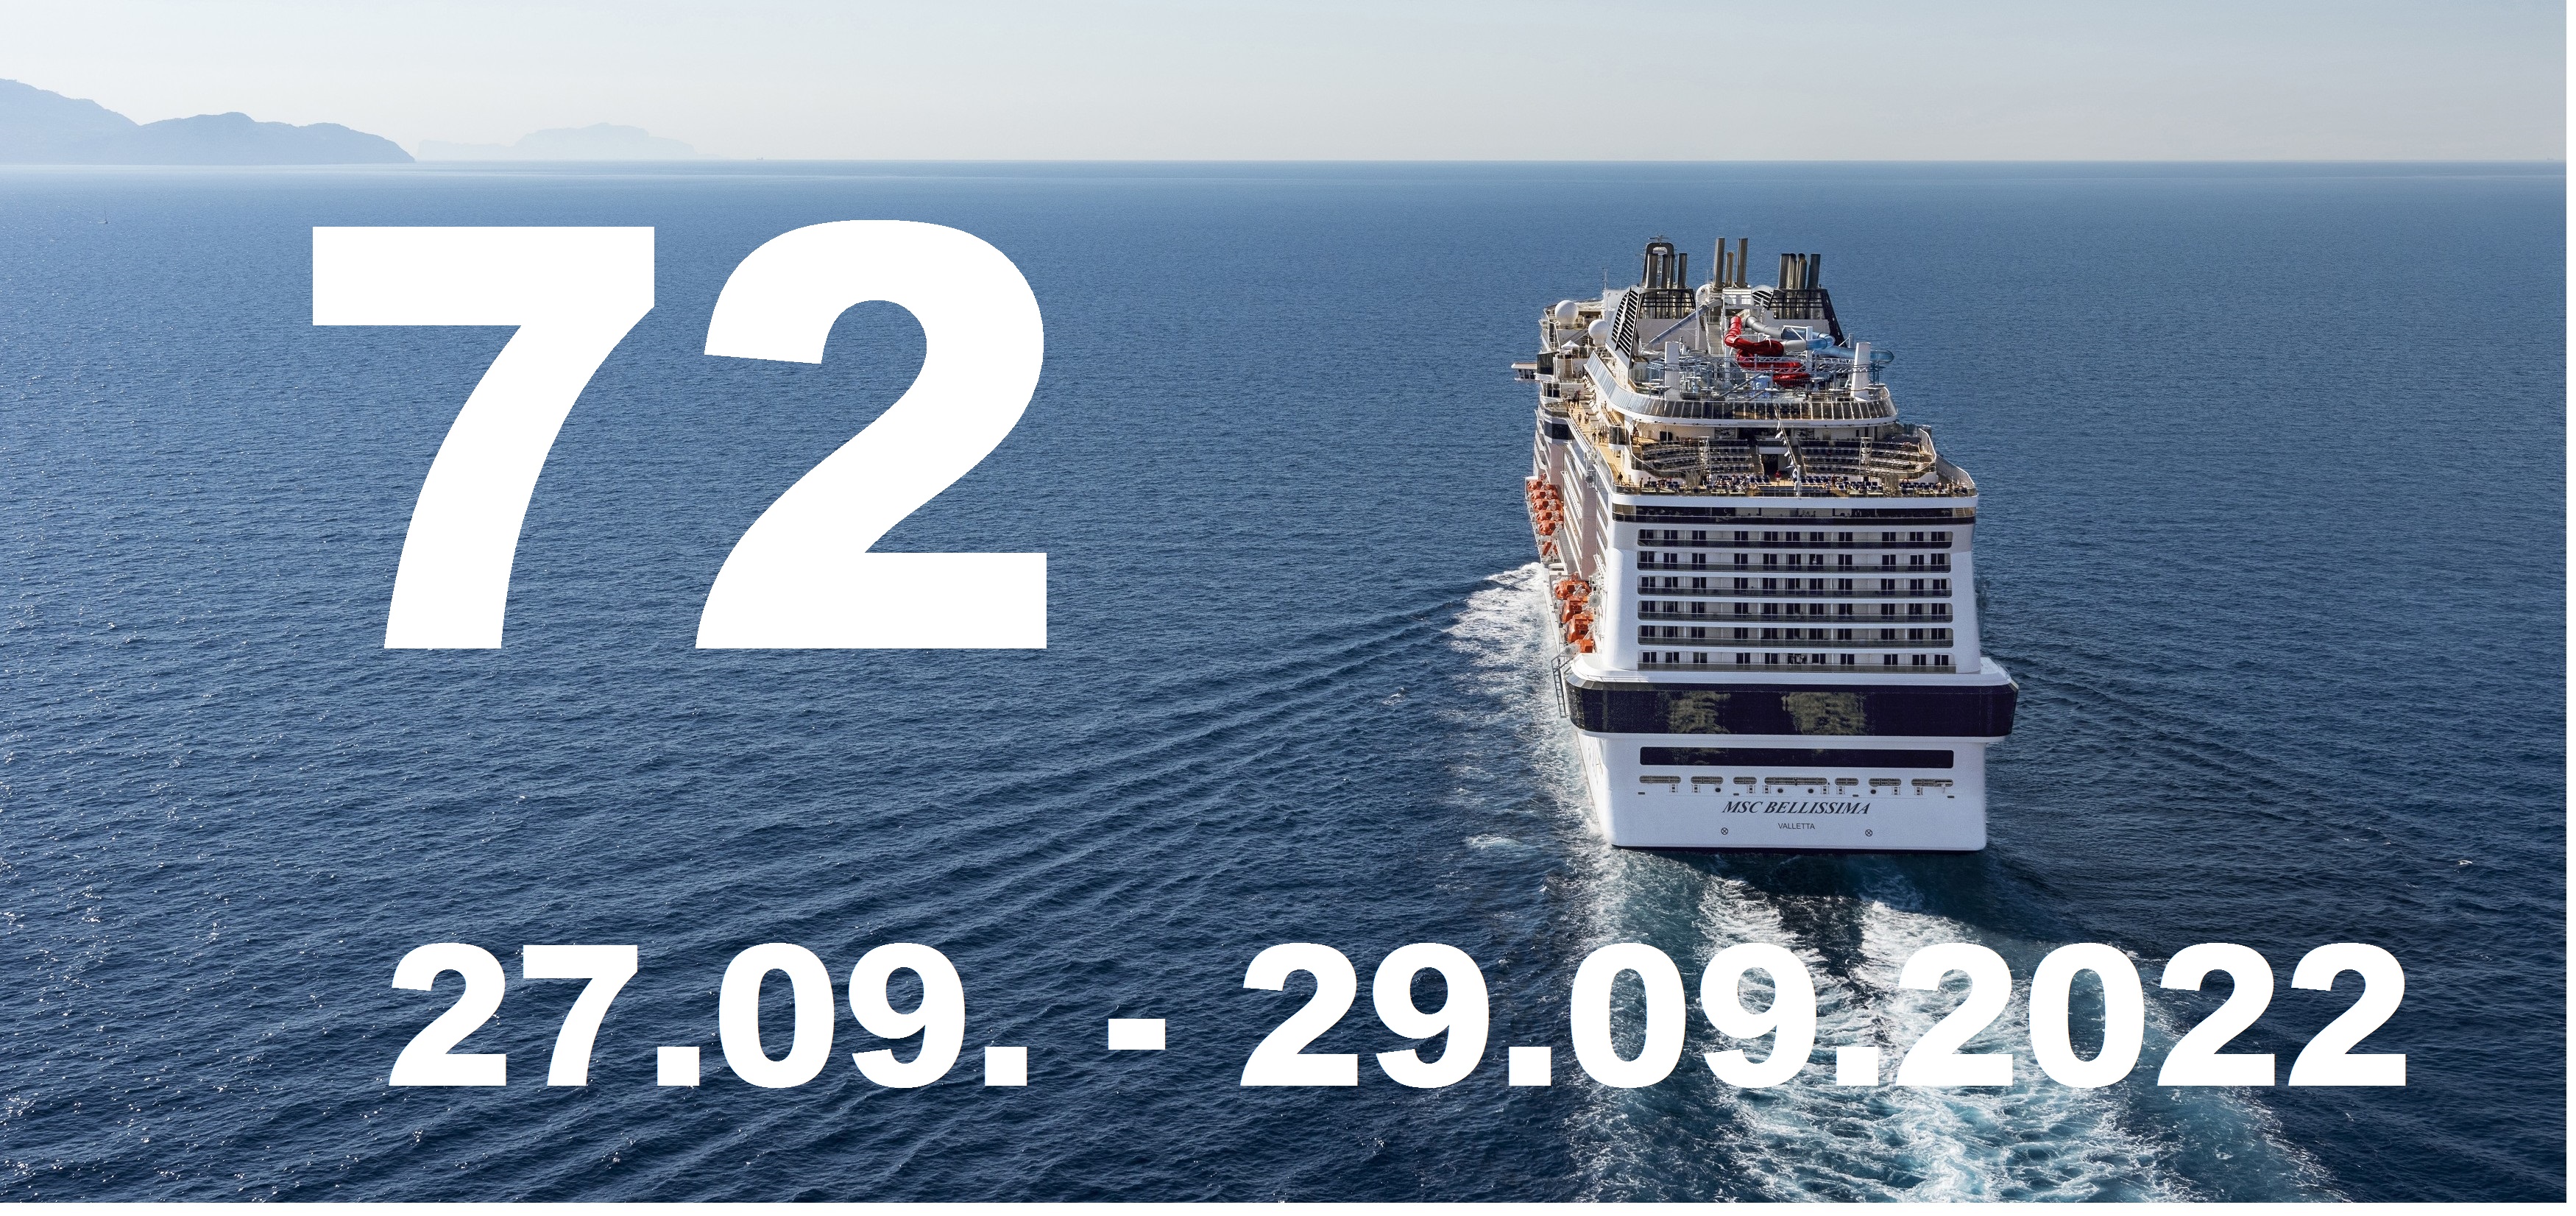 MSC Cruises: Promo "72 hours" for October cruises